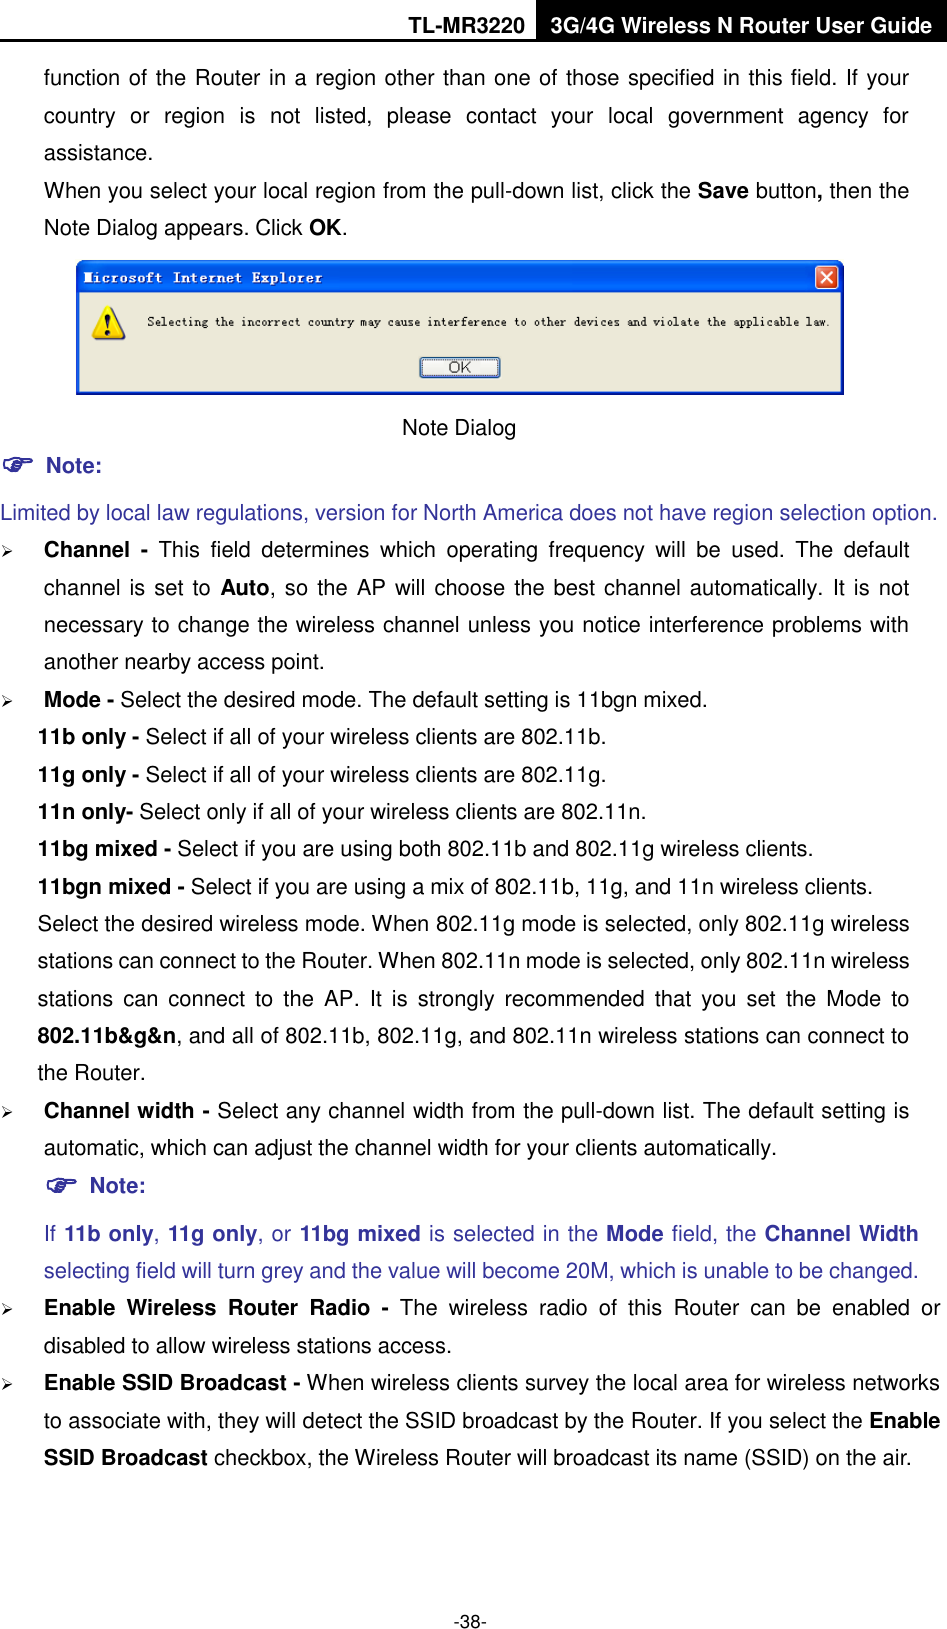 TL-MR3220 3G/4G Wireless N Router User Guide  -38- function of the Router in a region other than one of those specified in this field. If your country  or  region  is  not  listed,  please  contact  your  local  government  agency  for assistance. When you select your local region from the pull-down list, click the Save button, then the Note Dialog appears. Click OK.  Note Dialog    Note: Limited by local law regulations, version for North America does not have region selection option.  Channel  -  This  field  determines  which  operating  frequency  will  be  used.  The  default channel is set to Auto, so the AP will choose the best channel automatically. It is not necessary to change the wireless channel unless you notice interference problems with another nearby access point.  Mode - Select the desired mode. The default setting is 11bgn mixed. 11b only - Select if all of your wireless clients are 802.11b. 11g only - Select if all of your wireless clients are 802.11g. 11n only- Select only if all of your wireless clients are 802.11n. 11bg mixed - Select if you are using both 802.11b and 802.11g wireless clients. 11bgn mixed - Select if you are using a mix of 802.11b, 11g, and 11n wireless clients. Select the desired wireless mode. When 802.11g mode is selected, only 802.11g wireless stations can connect to the Router. When 802.11n mode is selected, only 802.11n wireless stations  can  connect  to  the  AP.  It  is  strongly  recommended  that  you  set  the  Mode  to 802.11b&amp;g&amp;n, and all of 802.11b, 802.11g, and 802.11n wireless stations can connect to the Router.  Channel width - Select any channel width from the pull-down list. The default setting is automatic, which can adjust the channel width for your clients automatically.  Note: If 11b only, 11g only, or 11bg mixed is selected in the Mode field, the Channel Width selecting field will turn grey and the value will become 20M, which is unable to be changed.    Enable  Wireless  Router  Radio  -  The  wireless  radio  of  this  Router  can  be  enabled  or disabled to allow wireless stations access.    Enable SSID Broadcast - When wireless clients survey the local area for wireless networks to associate with, they will detect the SSID broadcast by the Router. If you select the Enable SSID Broadcast checkbox, the Wireless Router will broadcast its name (SSID) on the air. 